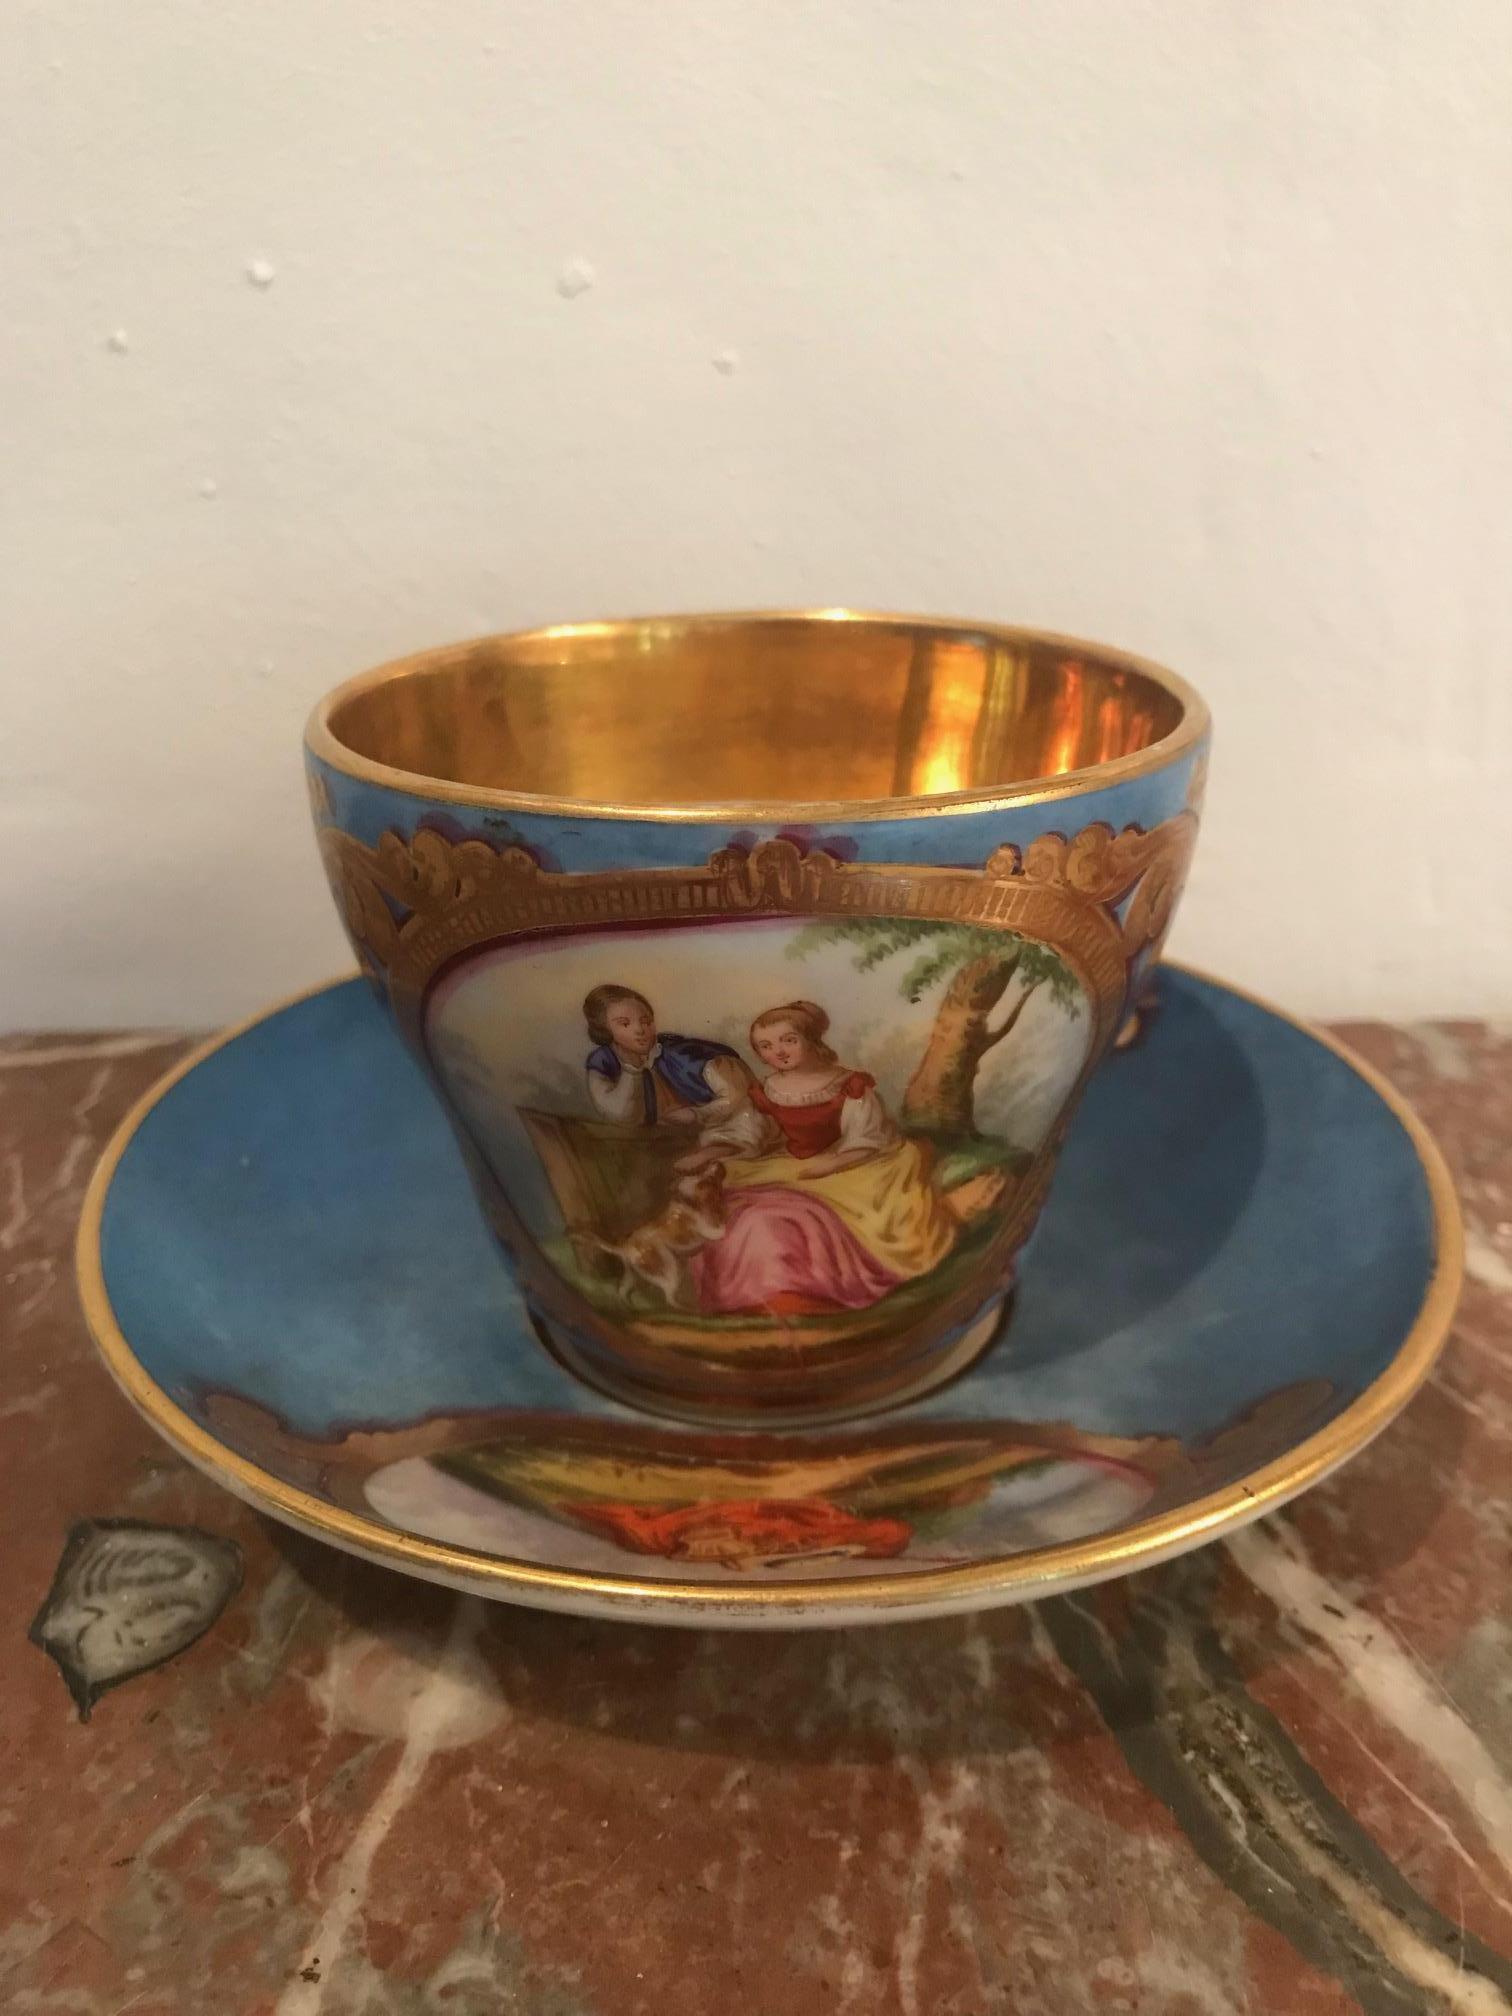 An 18th century Sèvres cup and saucer with the S Sèvres makers mark. The cup features two exquisitely painted Romantic figures and a gold leaf inner rim.